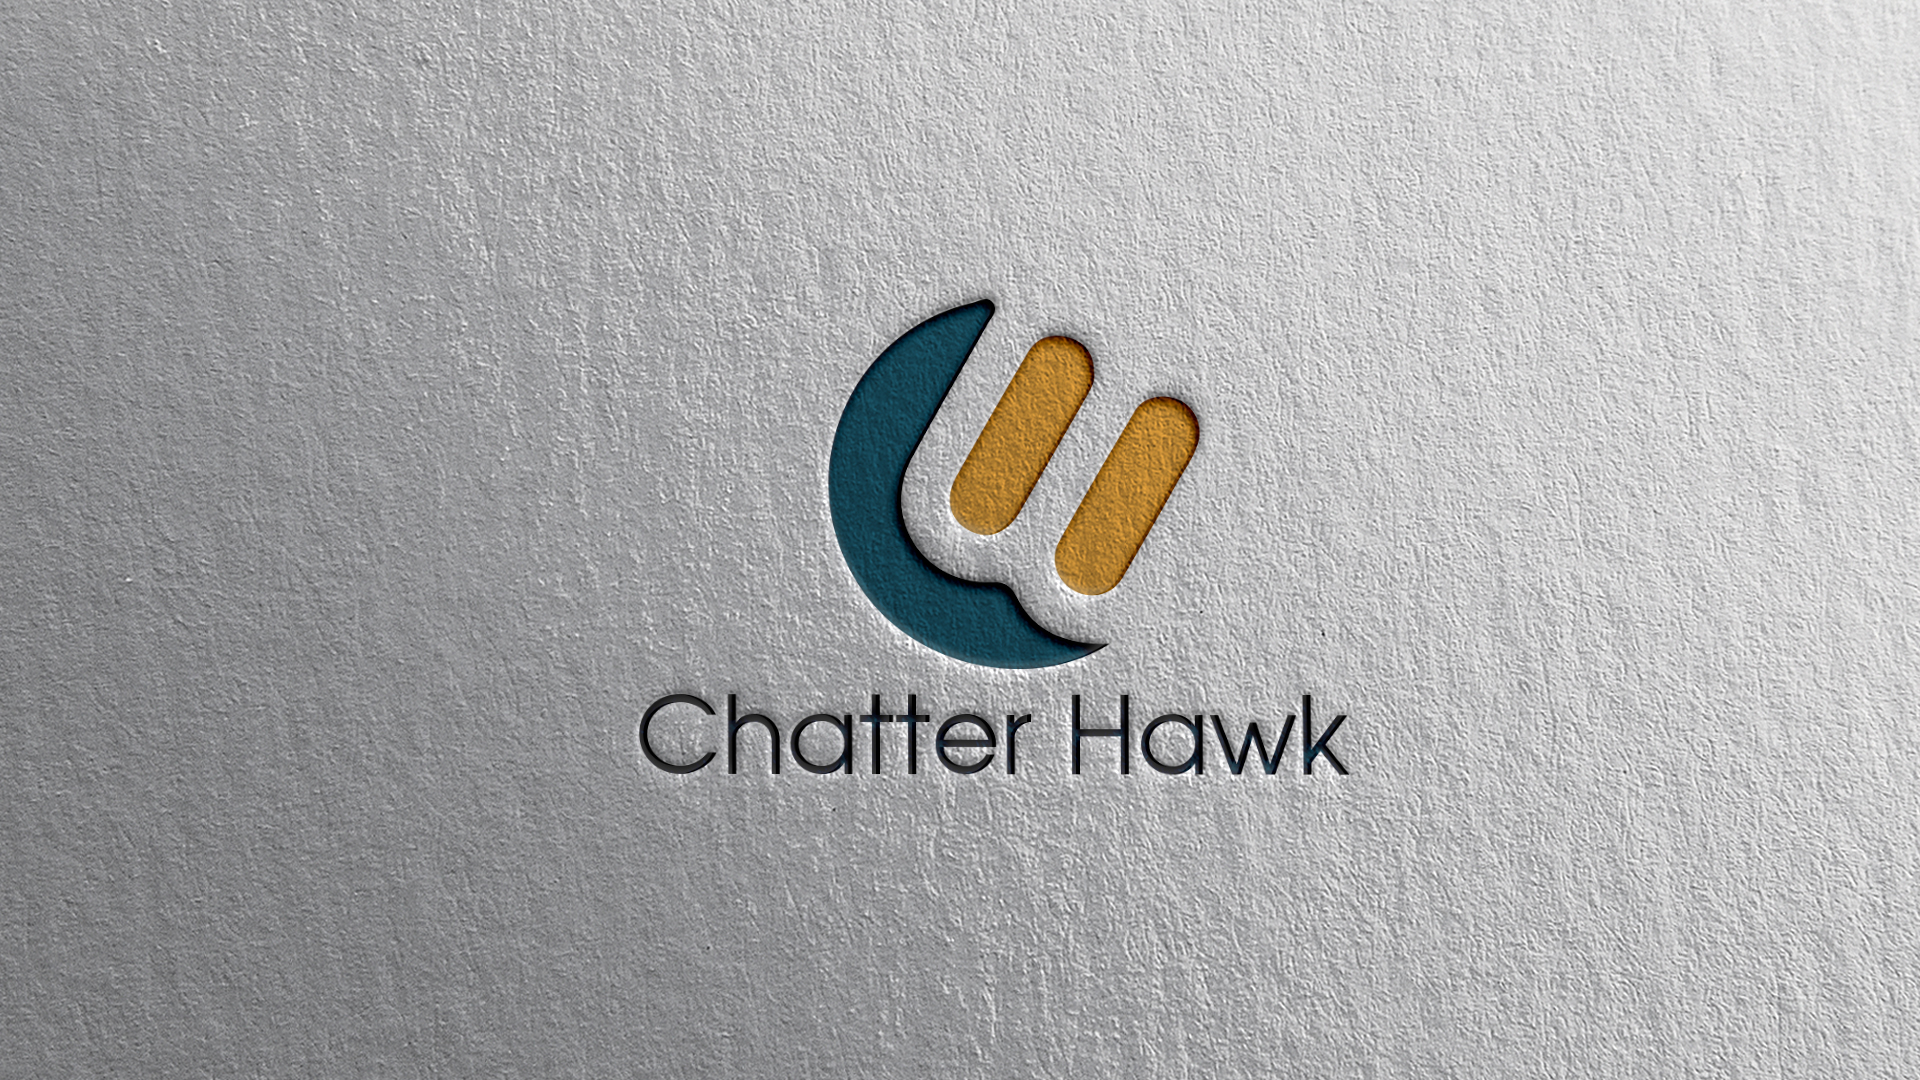 ChatterHawk is a new real-time social media advertising tool with unique immediacy and relevancy